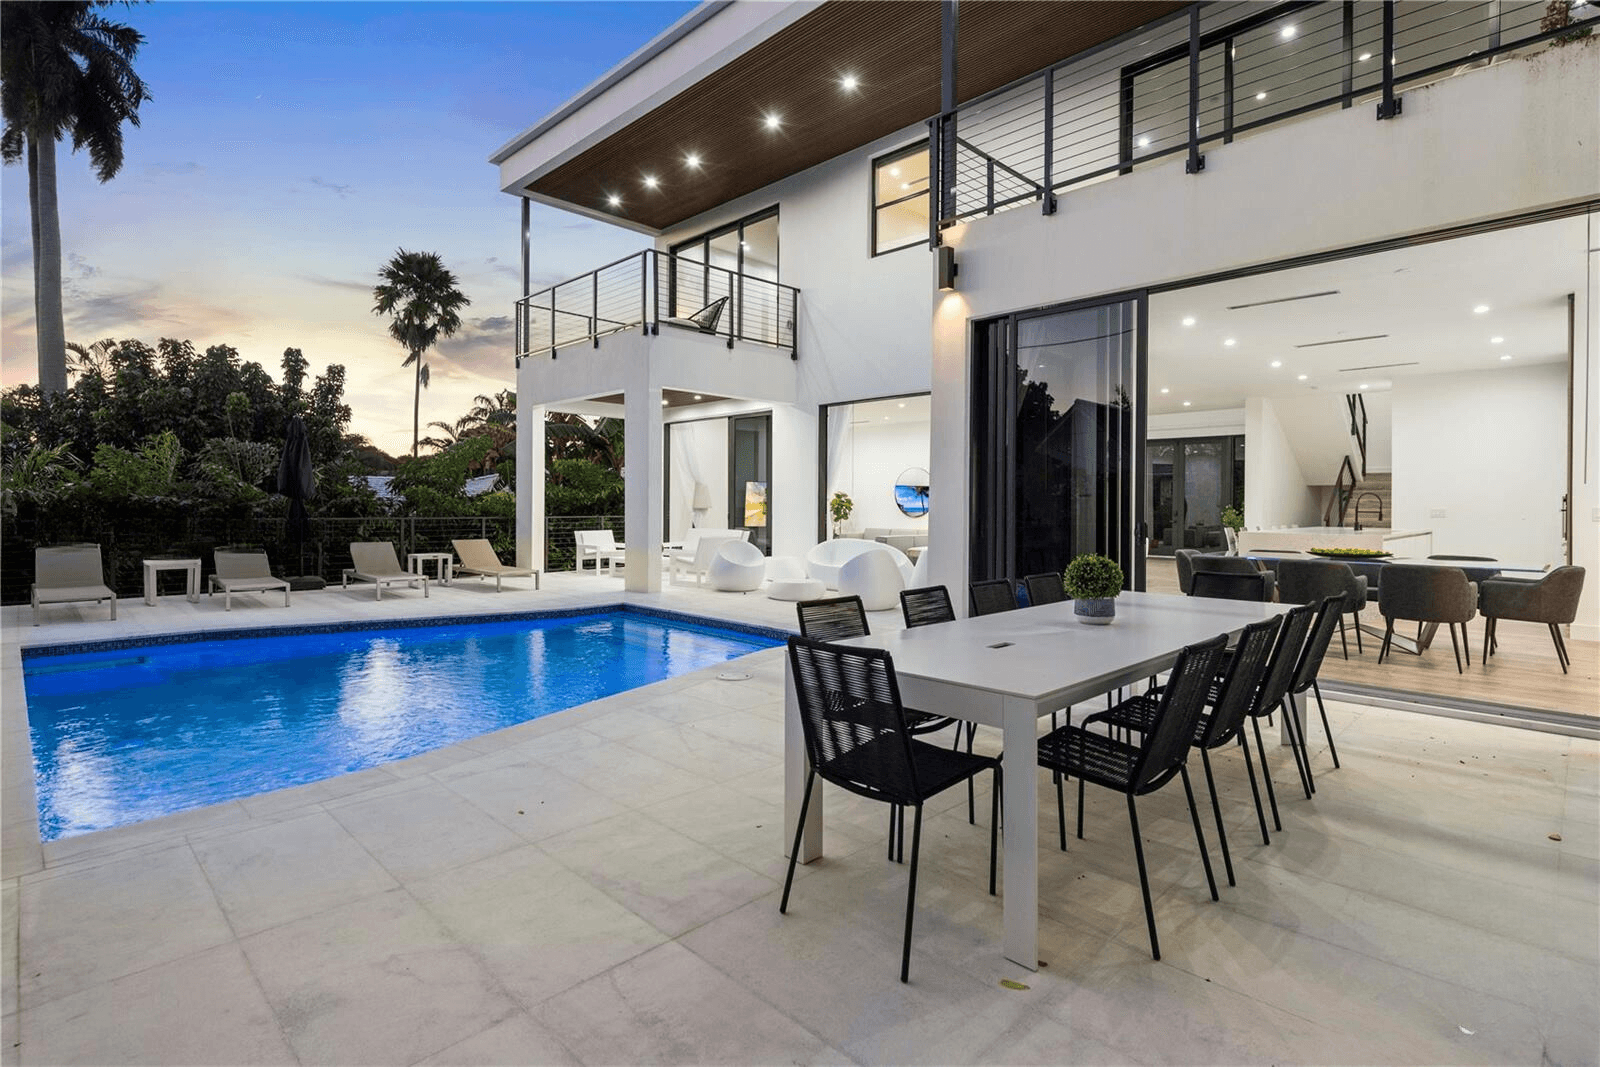 Sophisticated Living in the Heart of Miami Shores: Brand-New Elegance, High Ceilings, Modern Finishes, and a Stunning Rooftop Deck | 6 Beds | 5 Baths | 4109 sqft